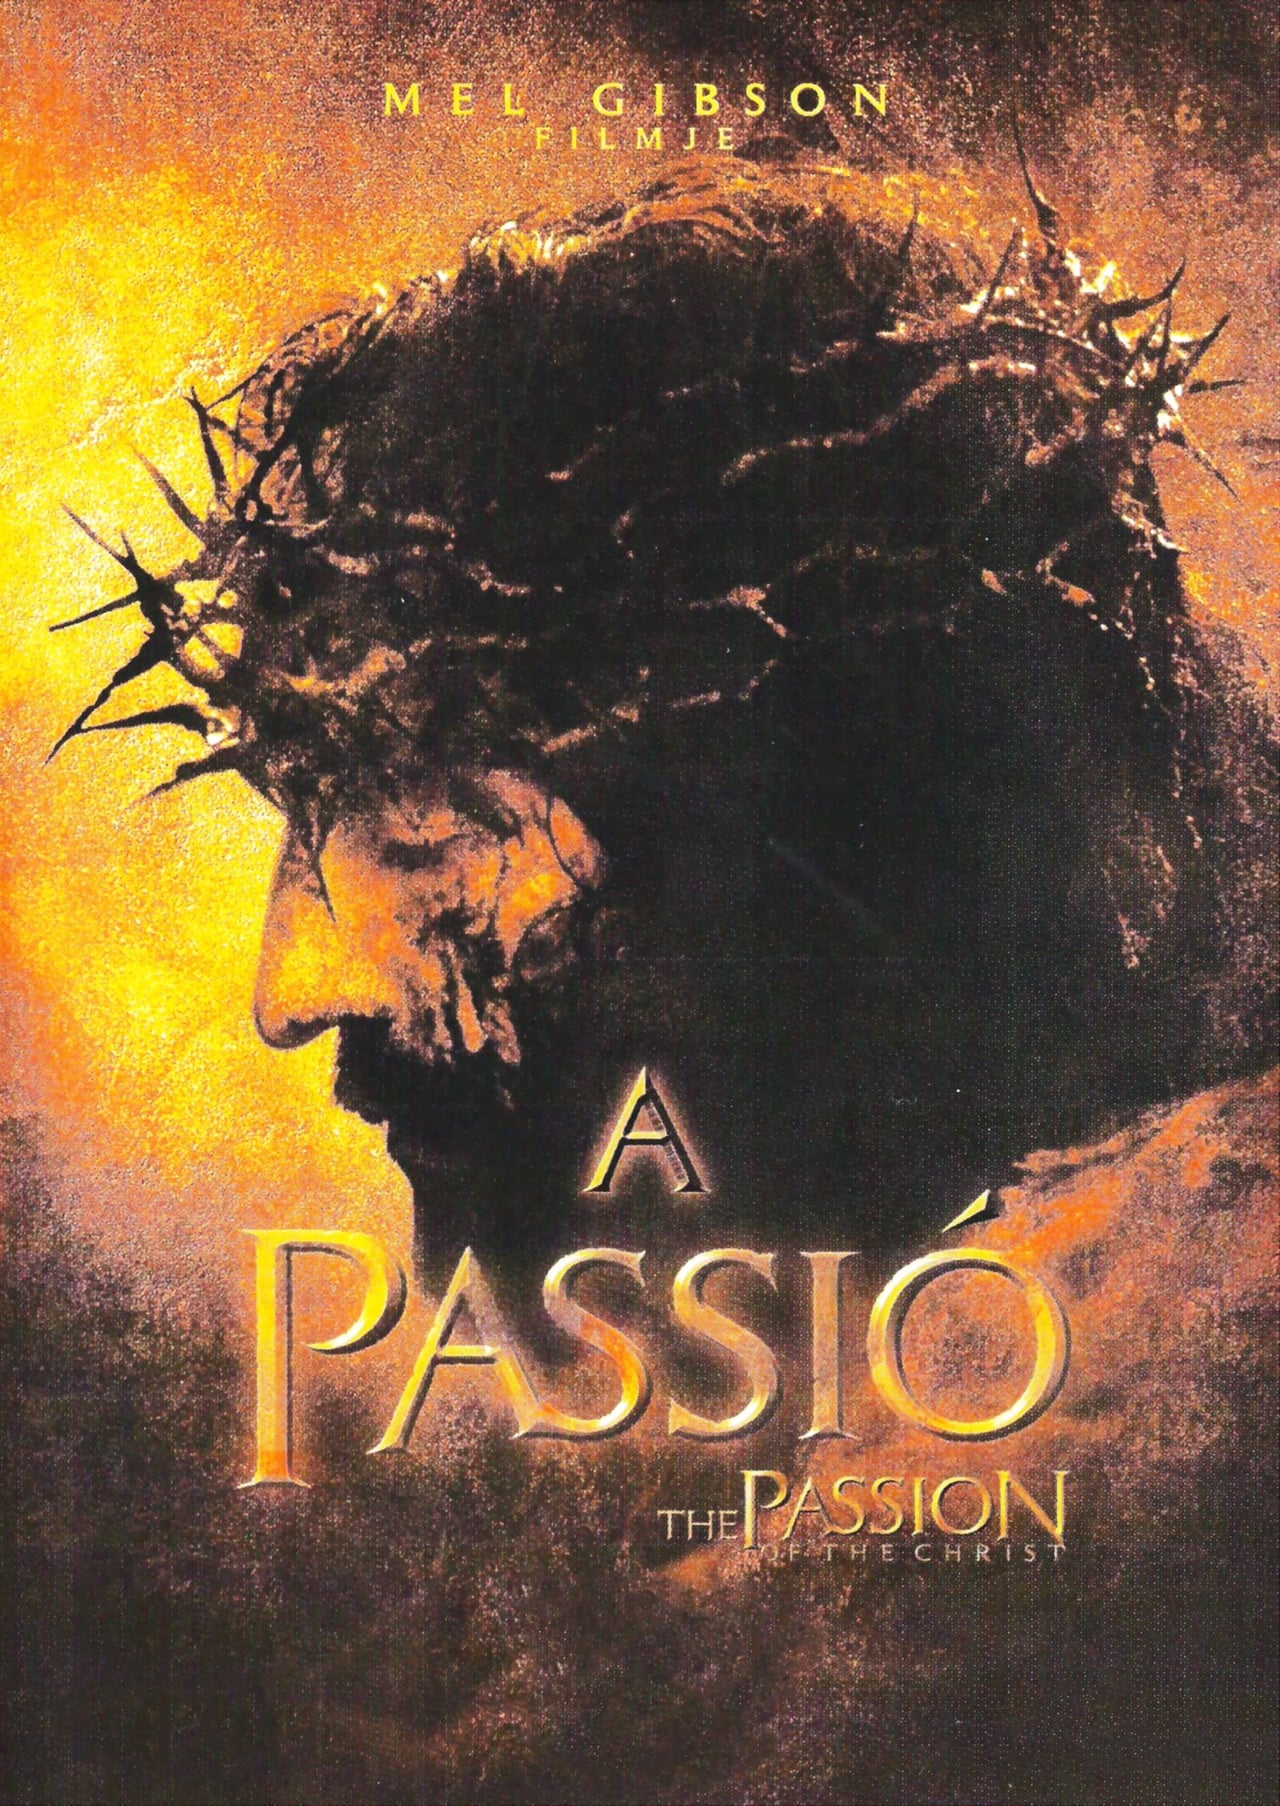 where can i watch passion of the christ online for free